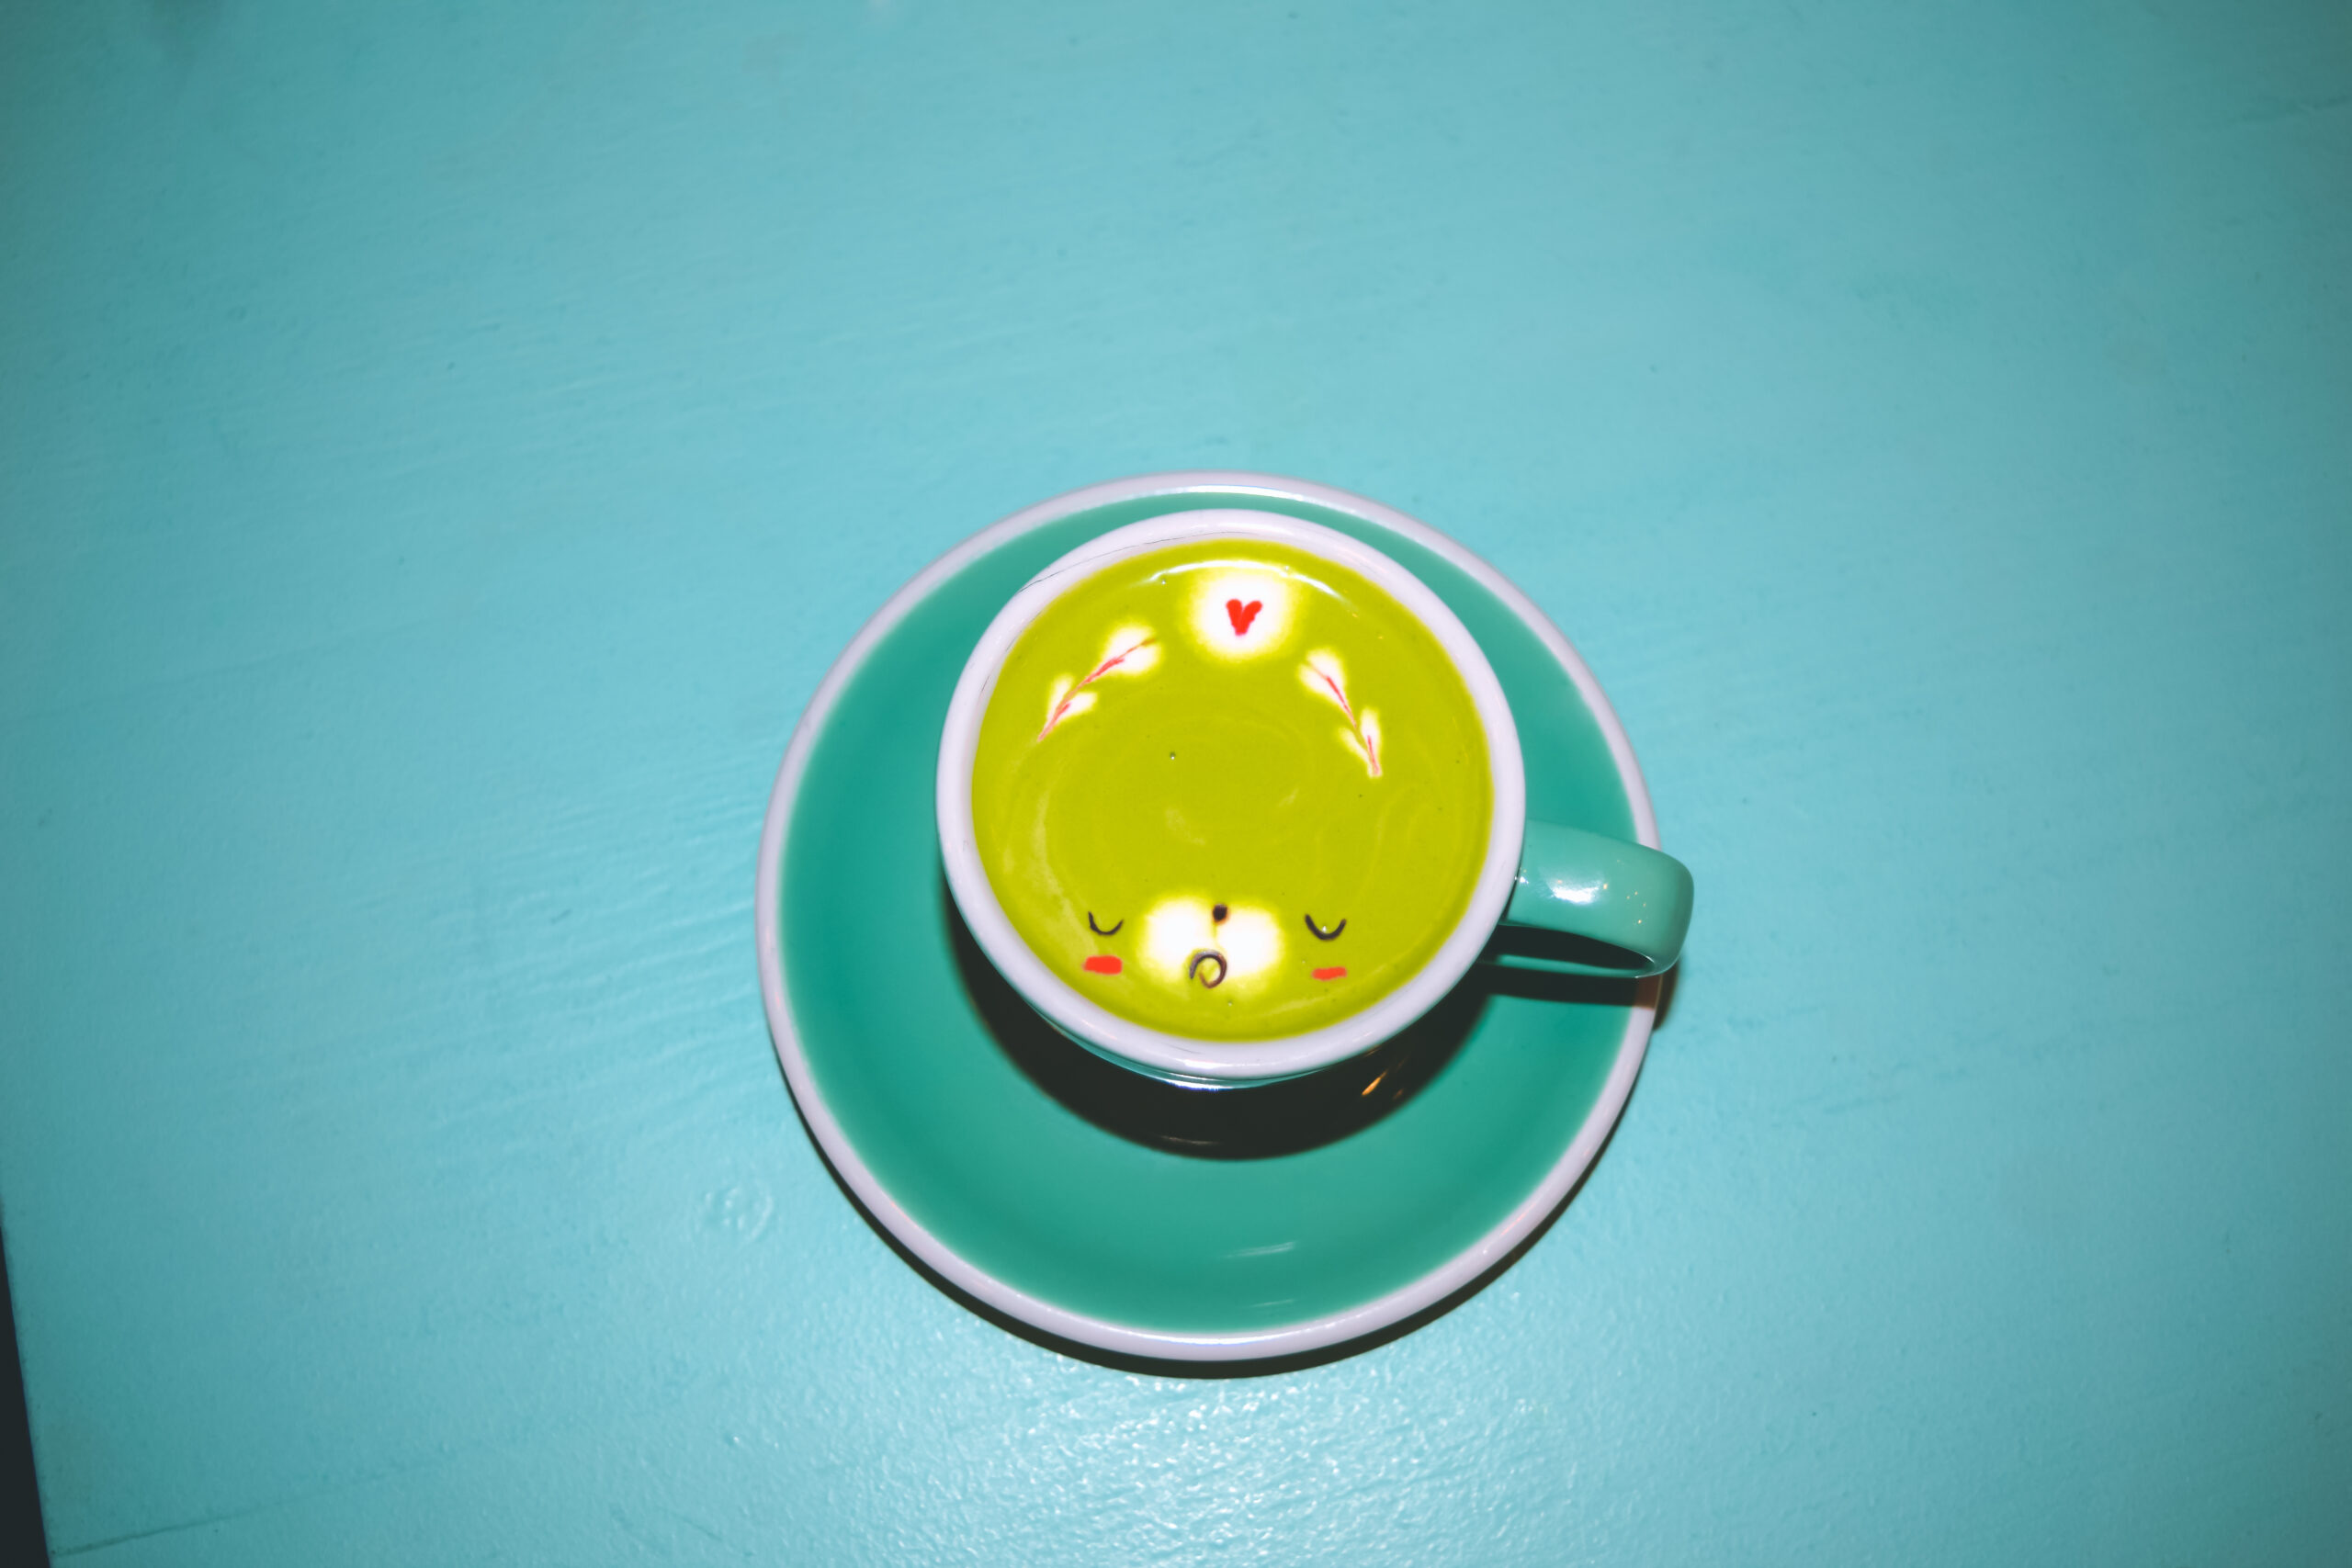 Creamart Matcha Manhattan Latte Art Treat Yourself To A Sweet Moment In NYC manhattan where to eat instagrammable food foodie weet moments lower east side china town hot chocolate art latte art travel blog guide manhattan new york travel what to do